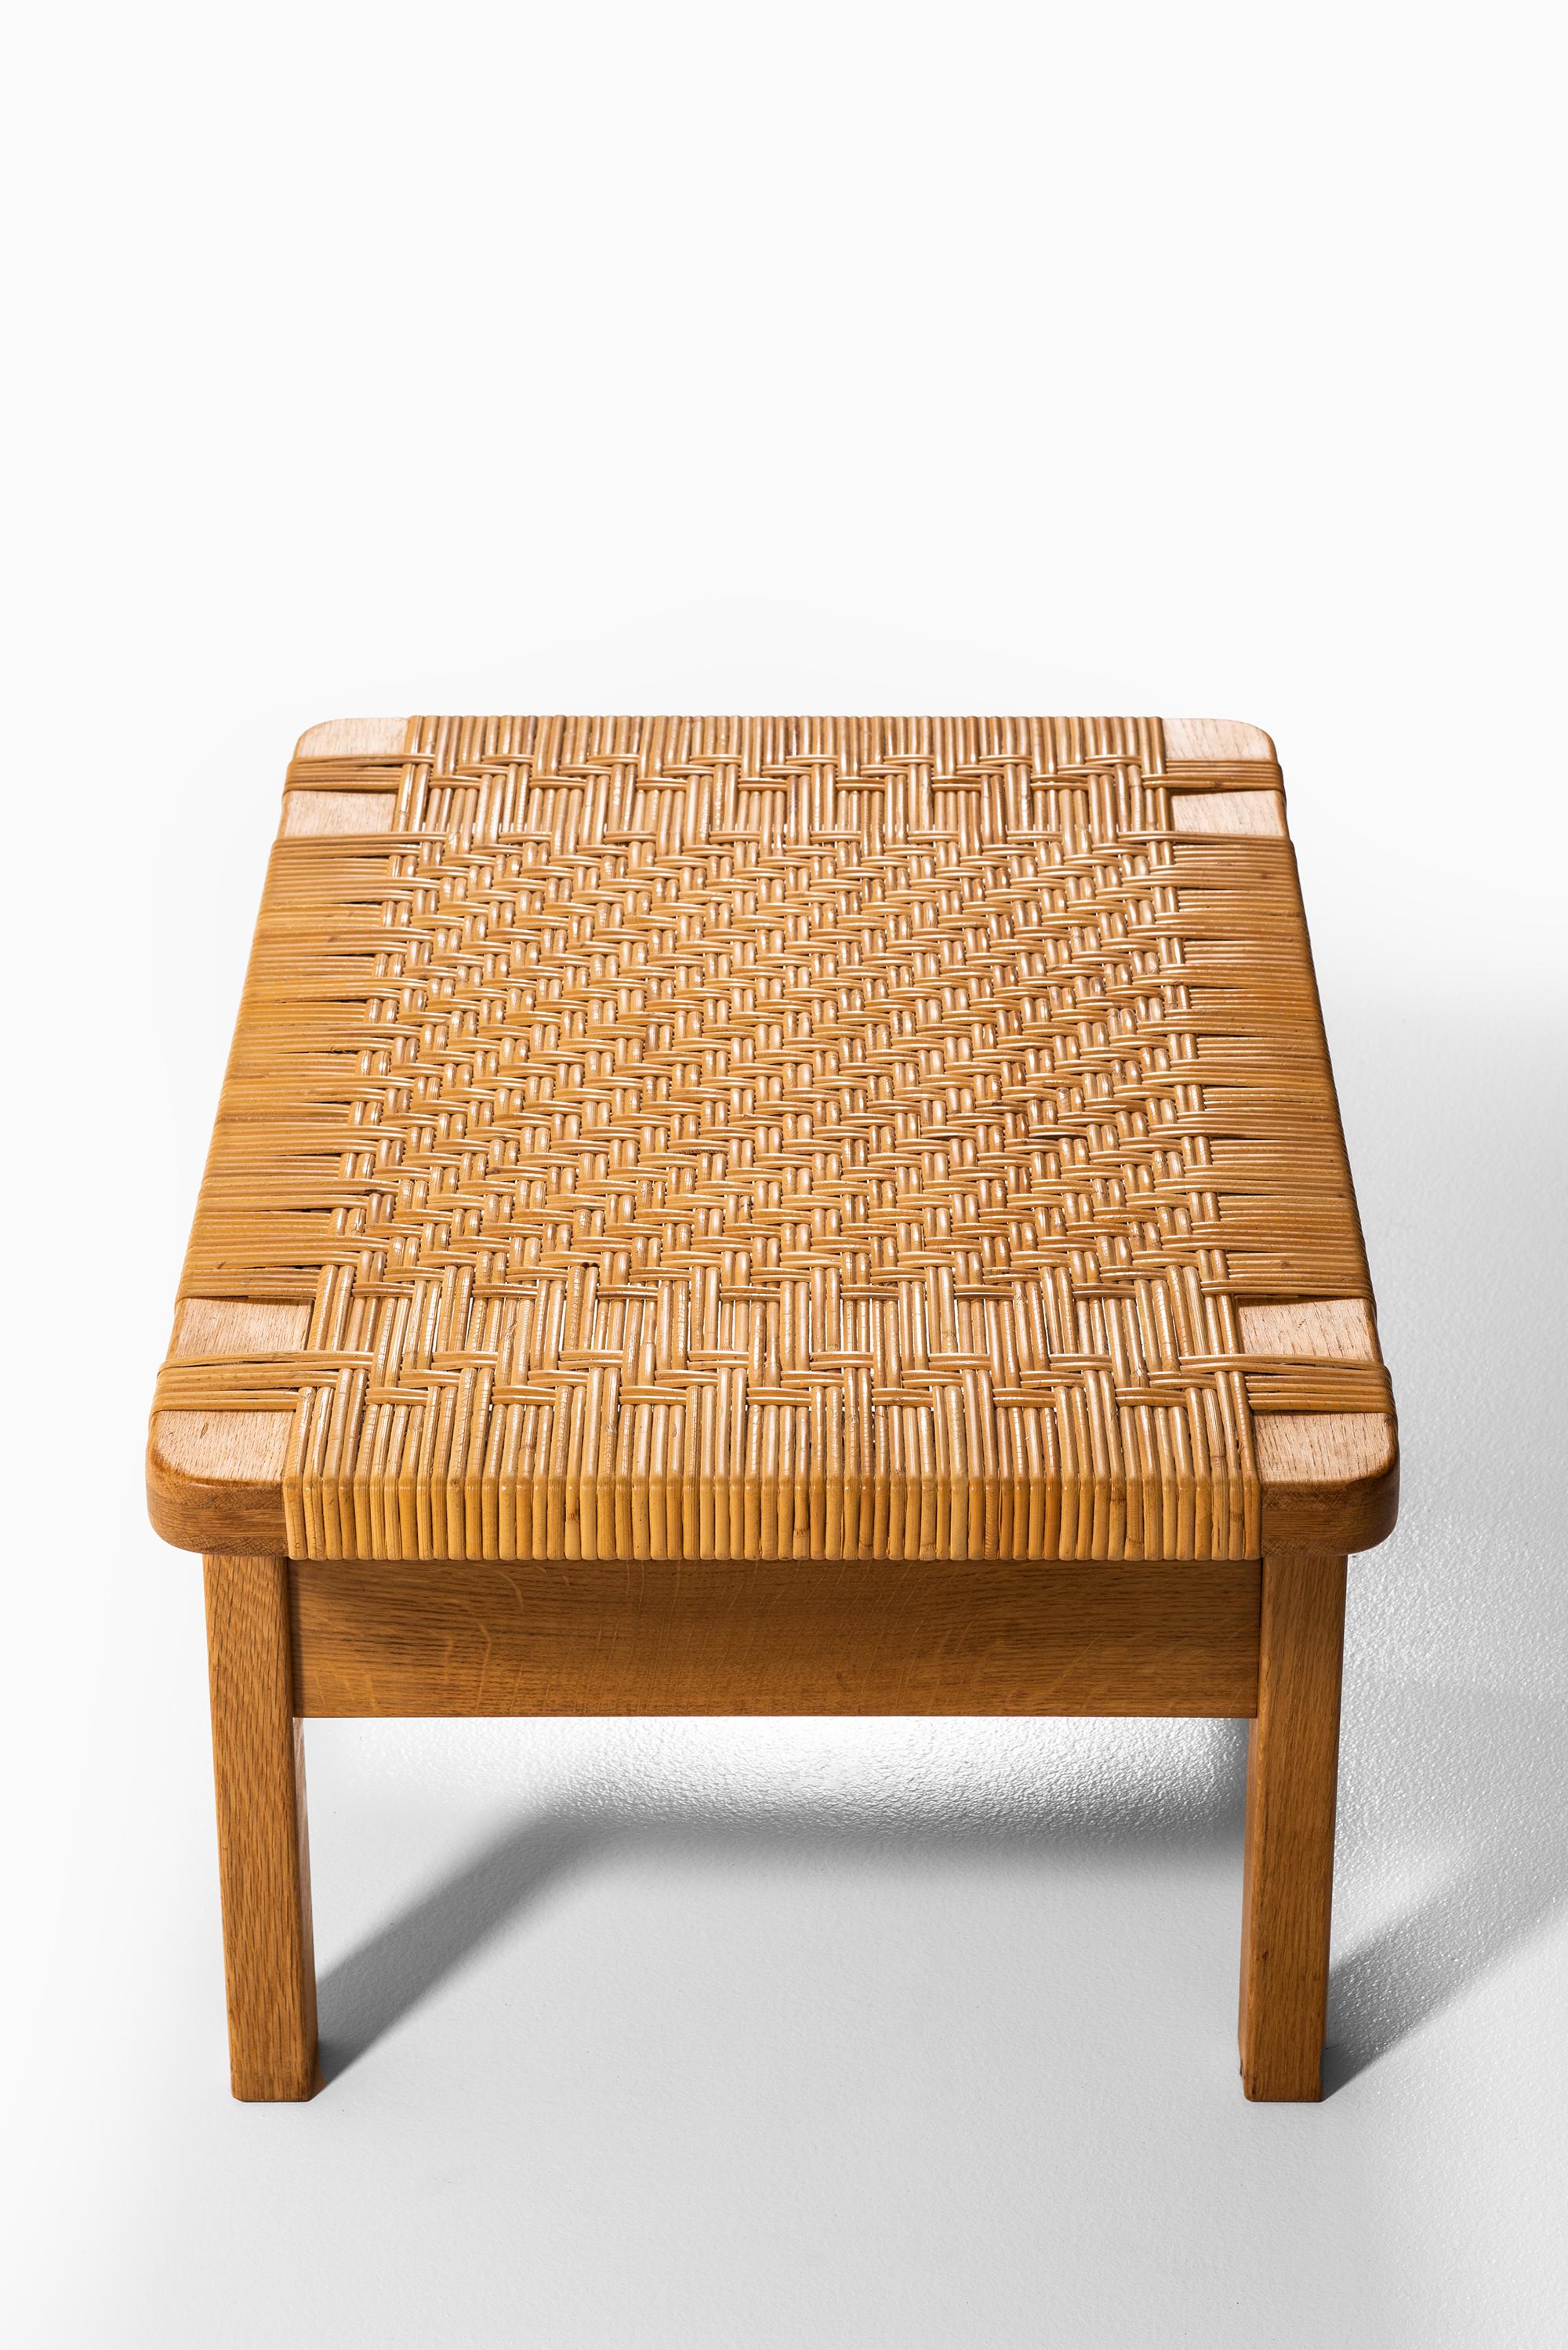 Mid-20th Century Børge Mogensen Side Tables by Fredericia Stolefabrik in Denmark For Sale